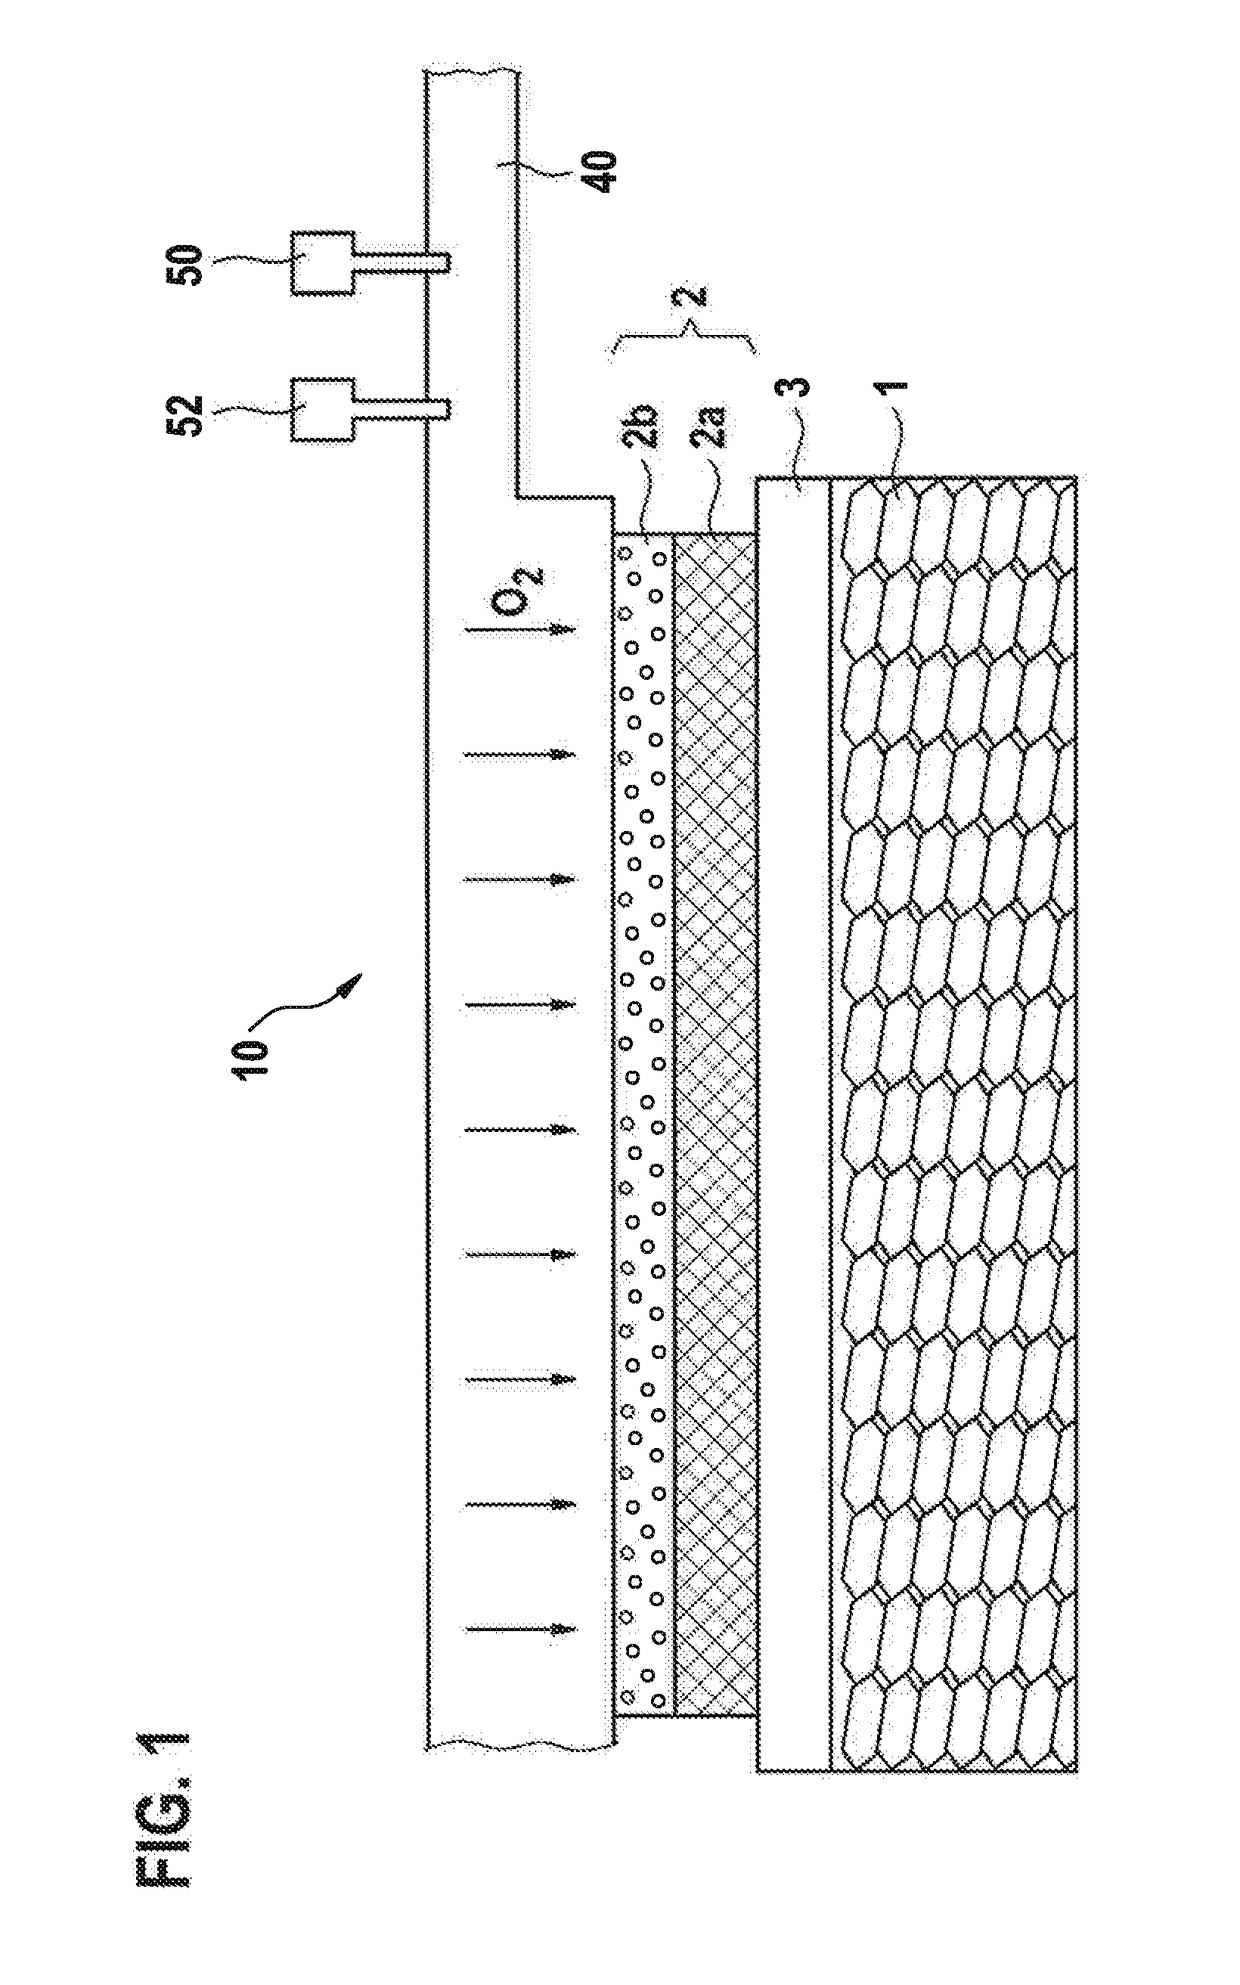 Battery cell, battery module and method for operating the same